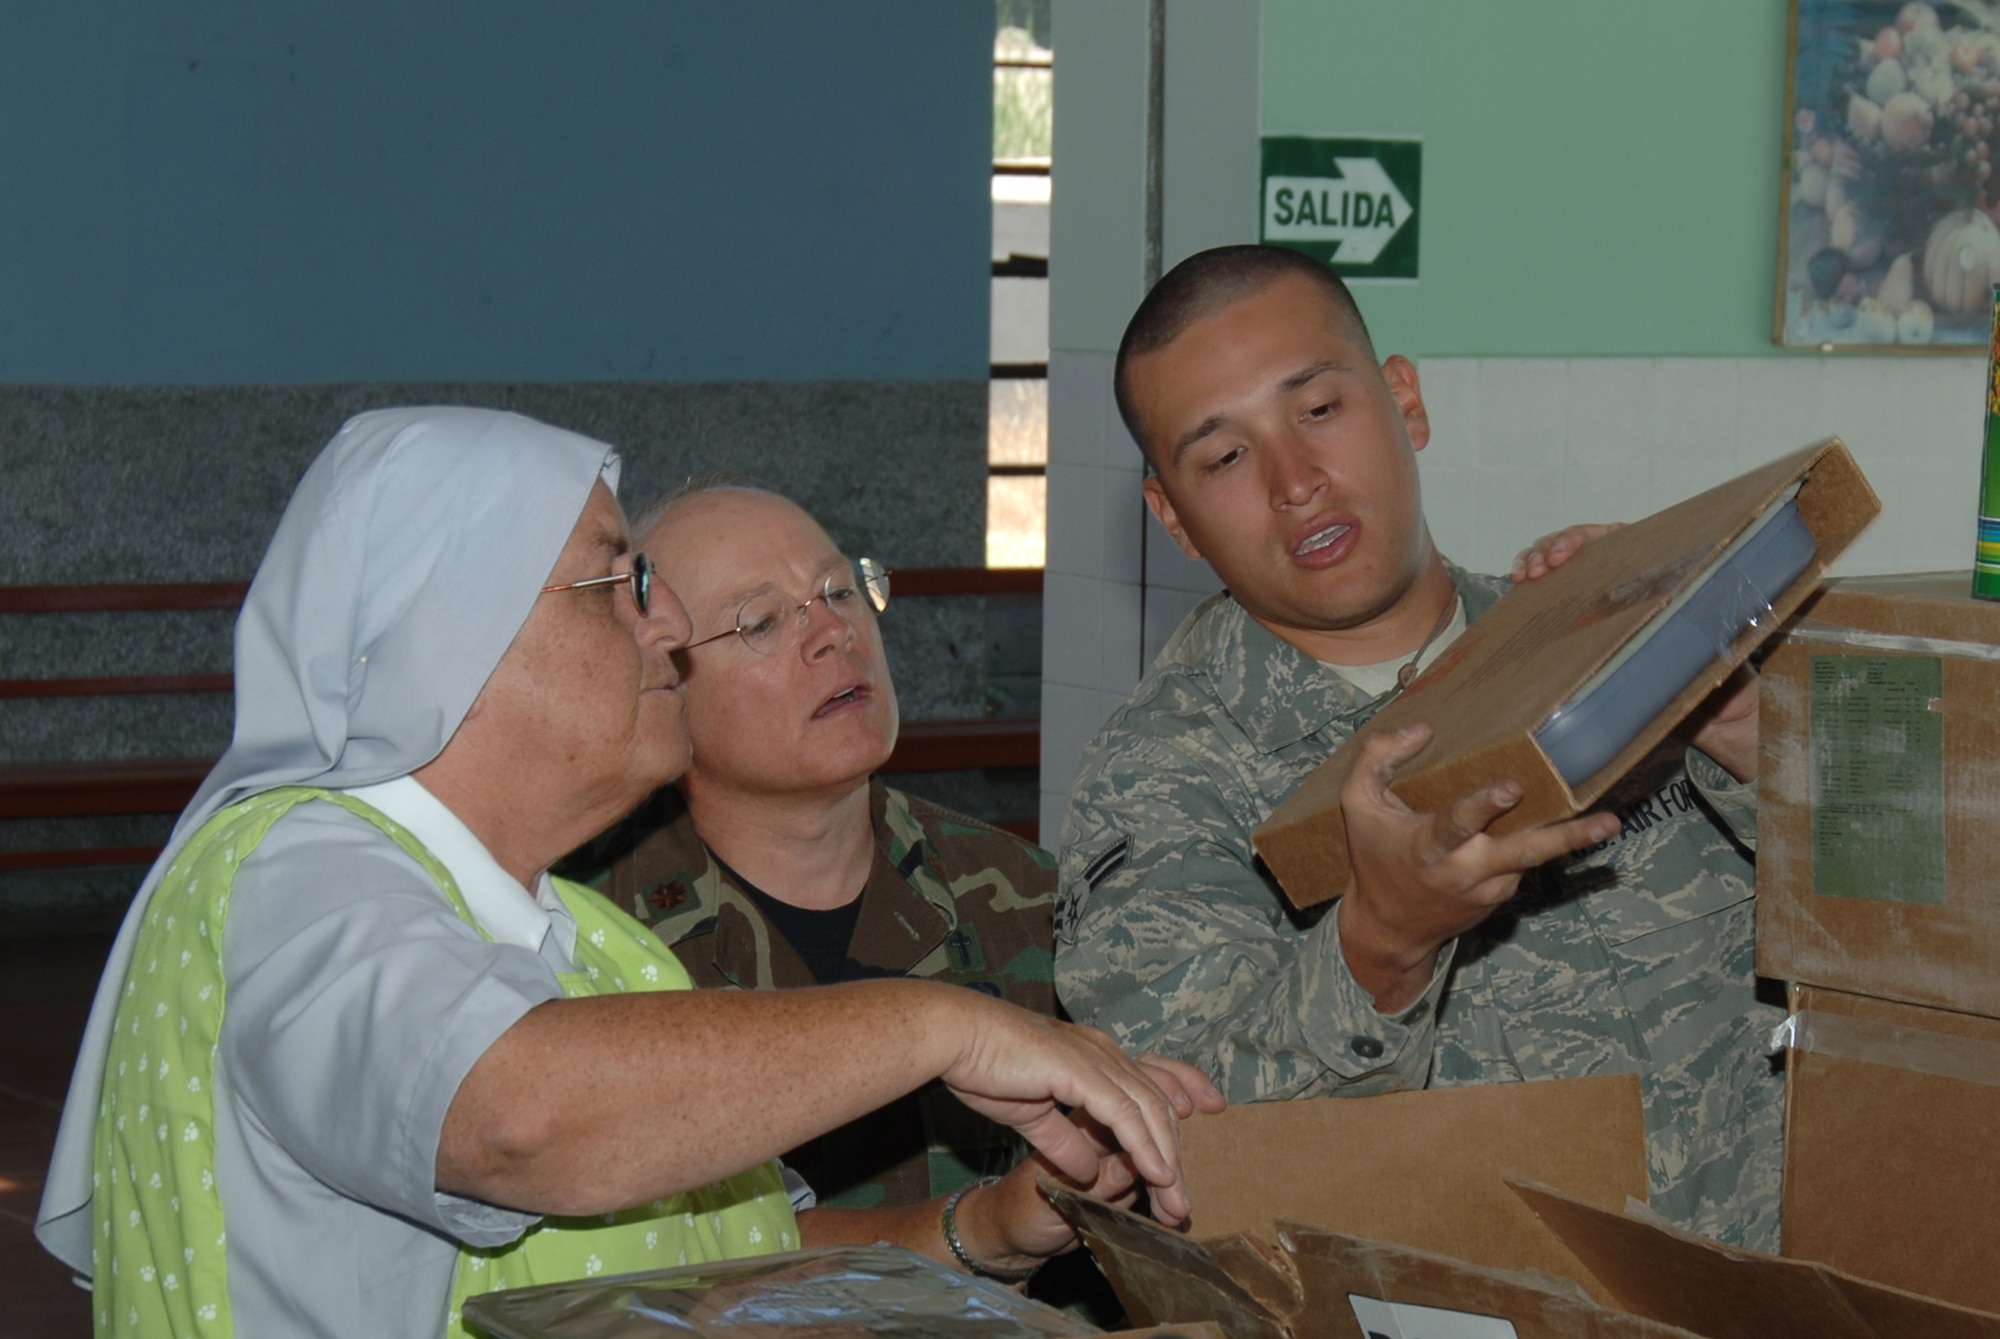 U.S. Air Force Airman 1st Class George Monroe, assigned to Tinker Air Force Base, Okla., offers his bilingual talents to describe the contents of food packages donated by Task Force New Horizons Peru, June 9, in support of New Horizons - Peru 2008, a U.S. and Peru partnered effort to bring relief to underprivileged Peruvians. (U.S. Air Force photo/Tech. Sgt. Kerry Jackson)